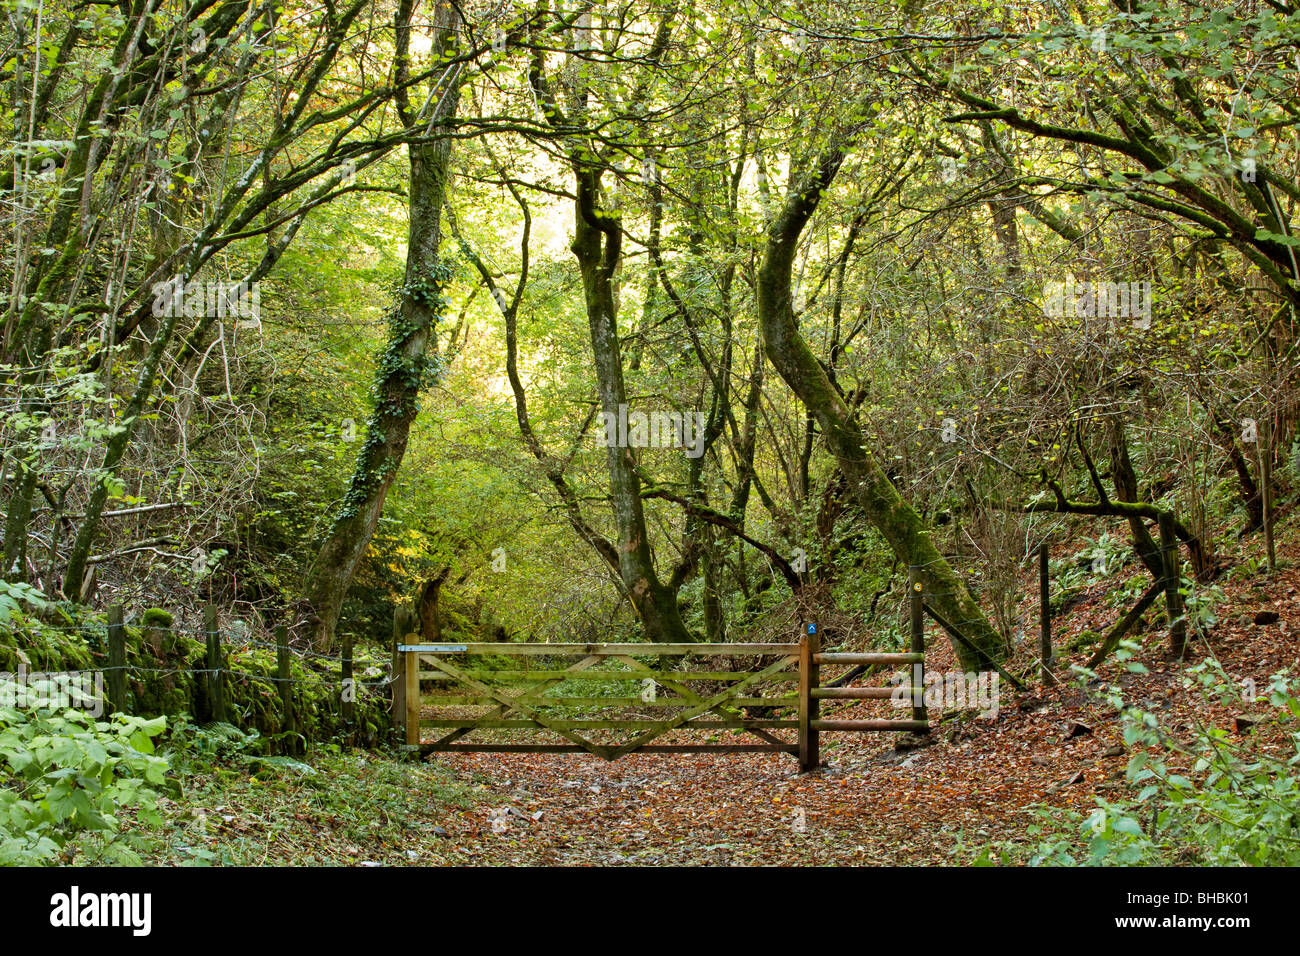 Autumn scene through wooded public footpath near black rock at Cheddar with five bar wooden gate Stock Photo